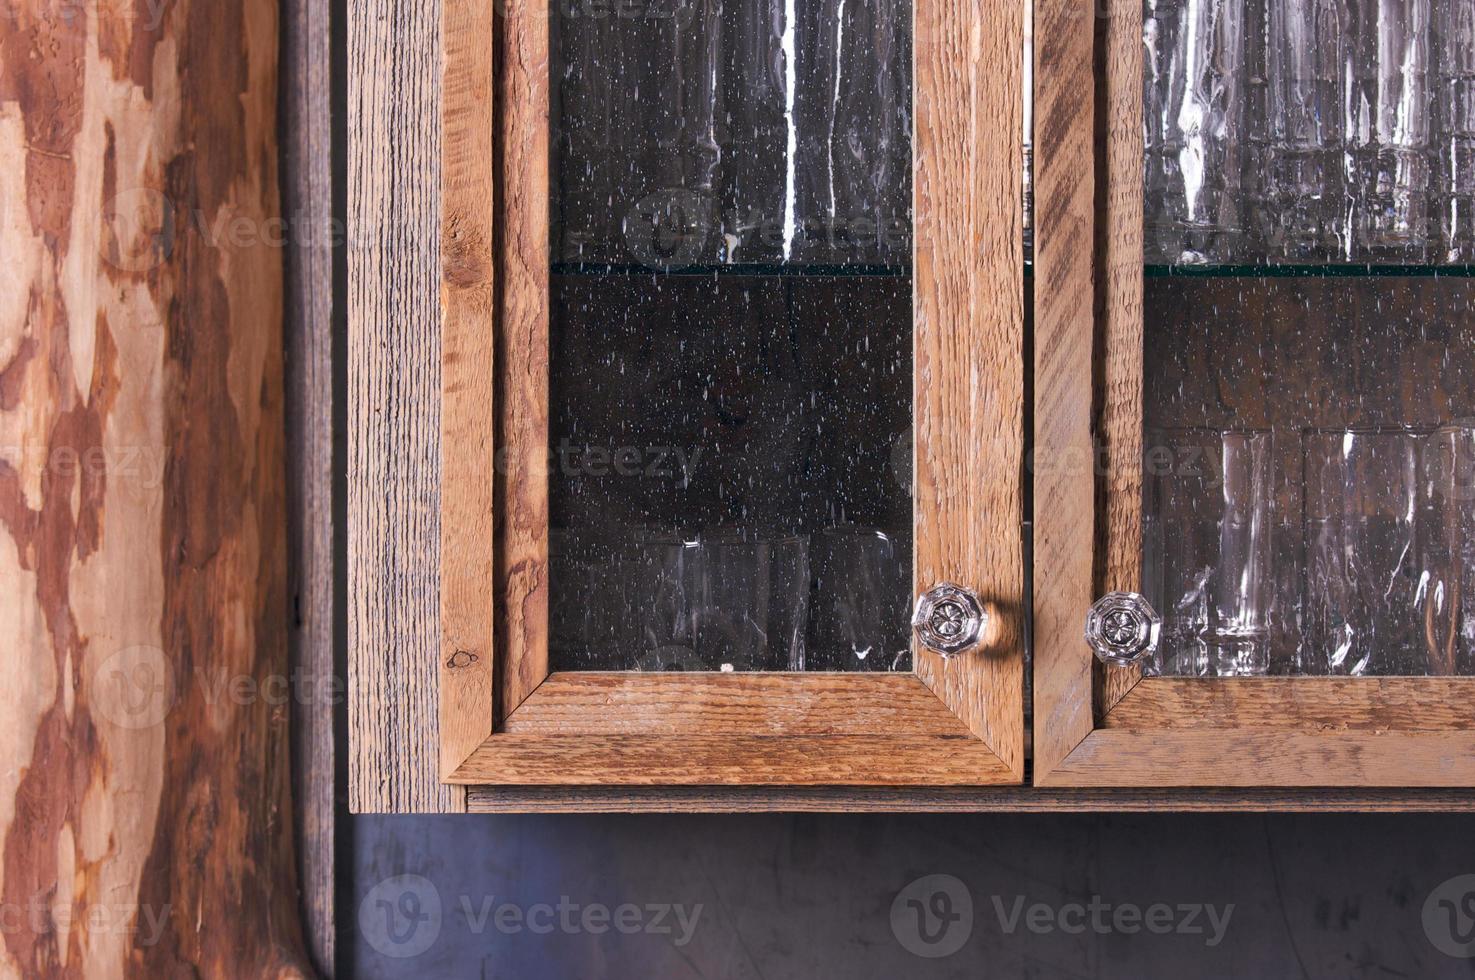 Rustic Cabinet Abstract photo